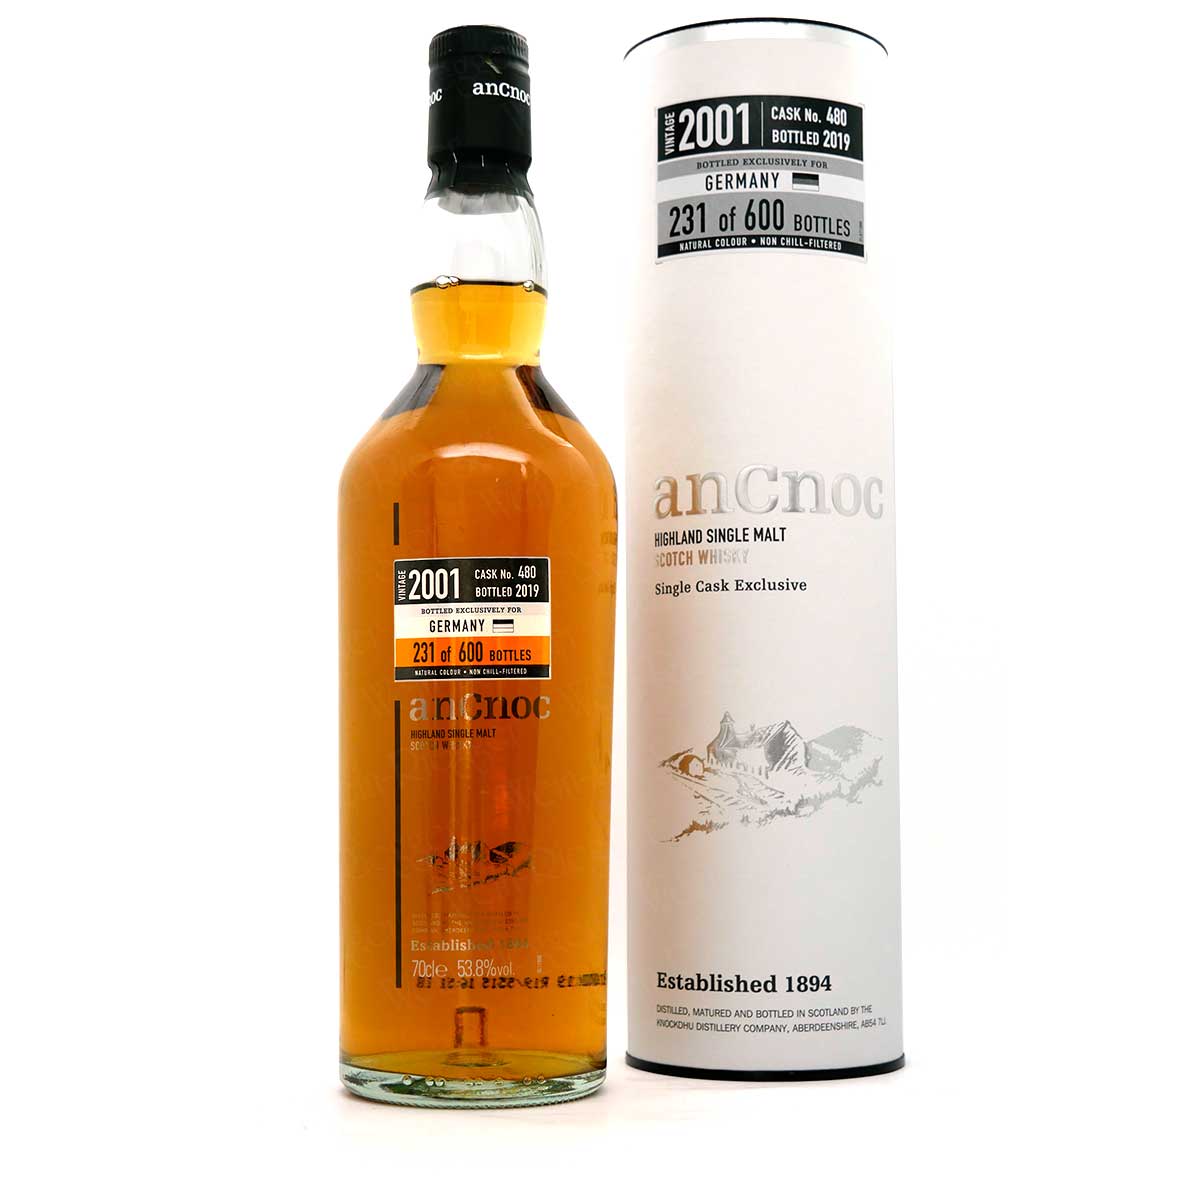 AnCnoc 01/19 Germany Exclusive | Cask No. 480